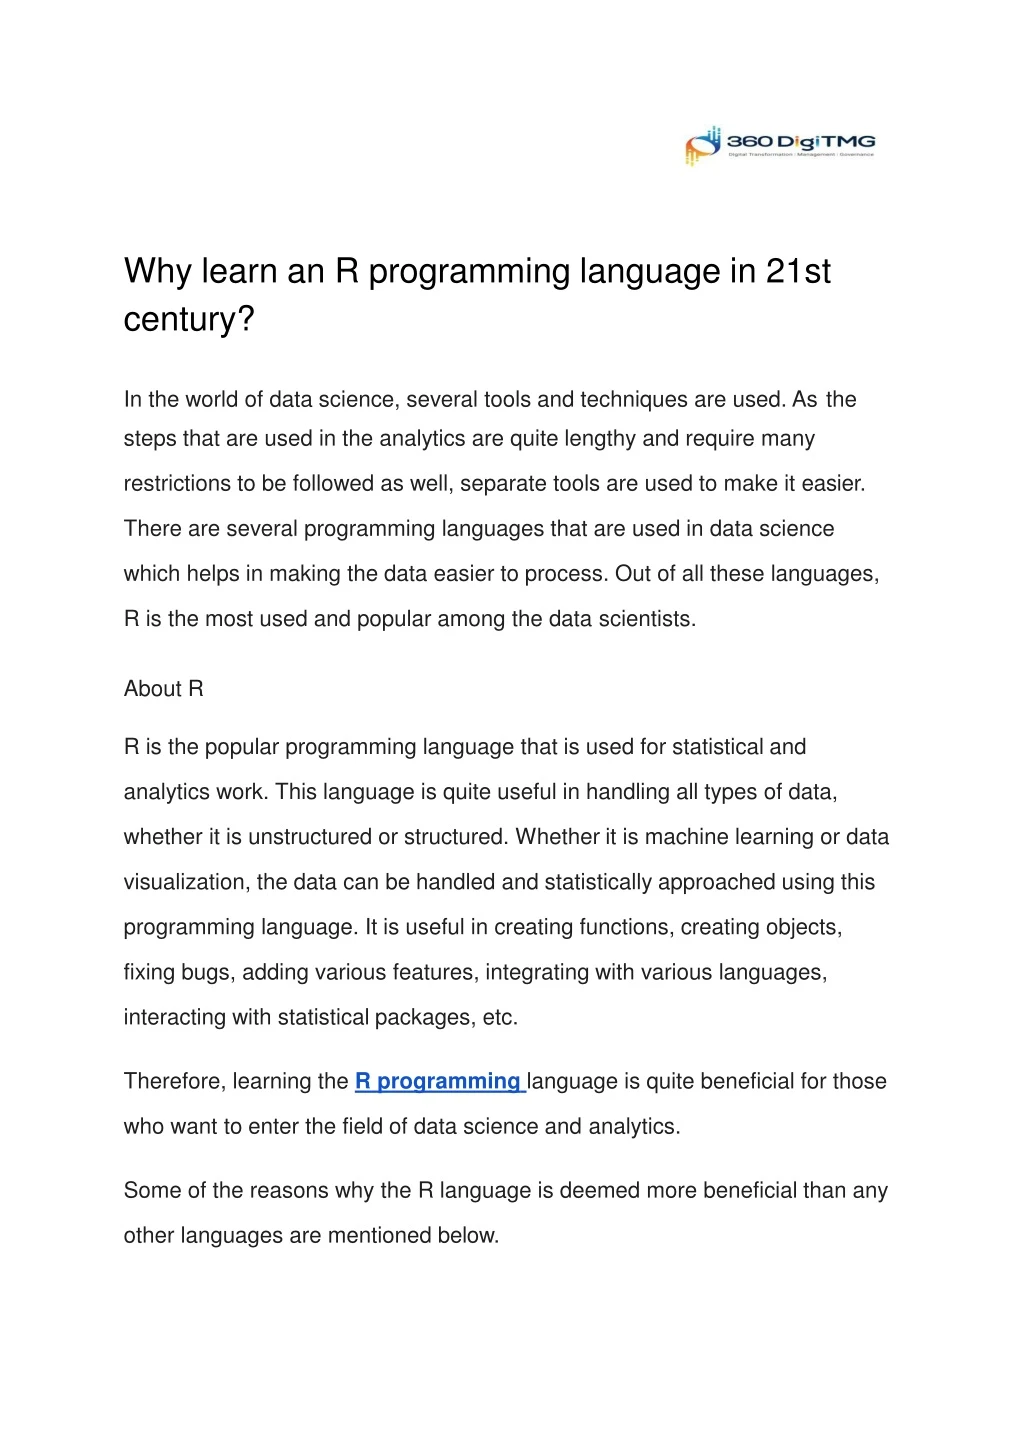 why learn an r programming language in 21st